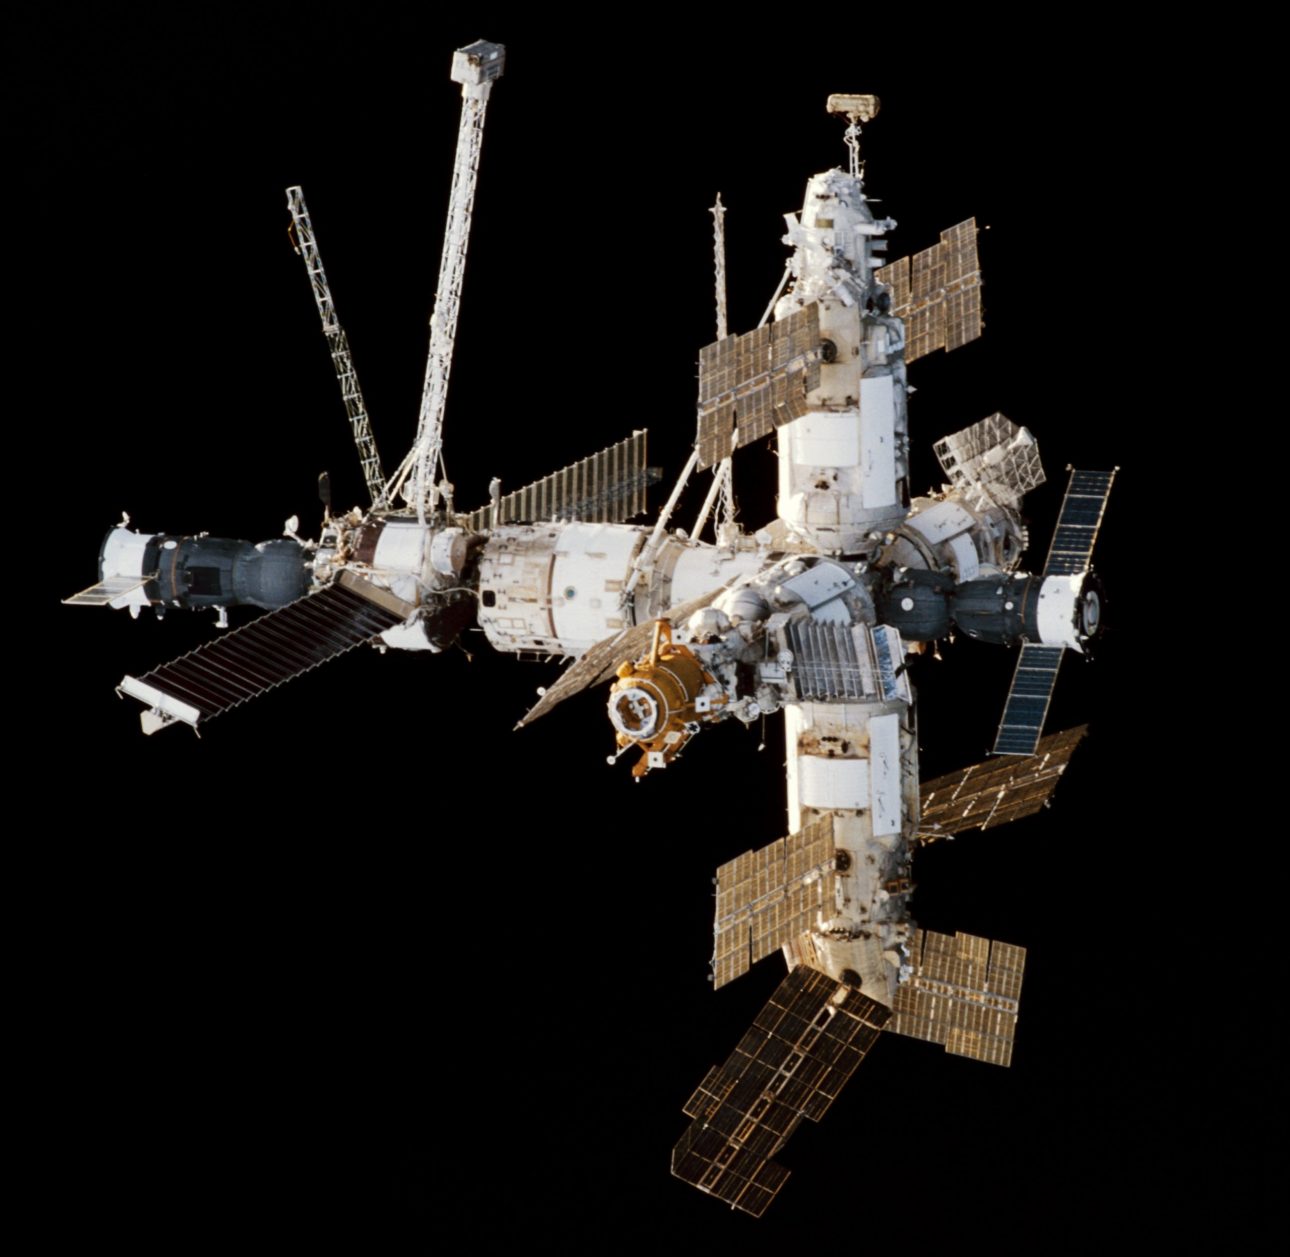 Mir_Space_Station